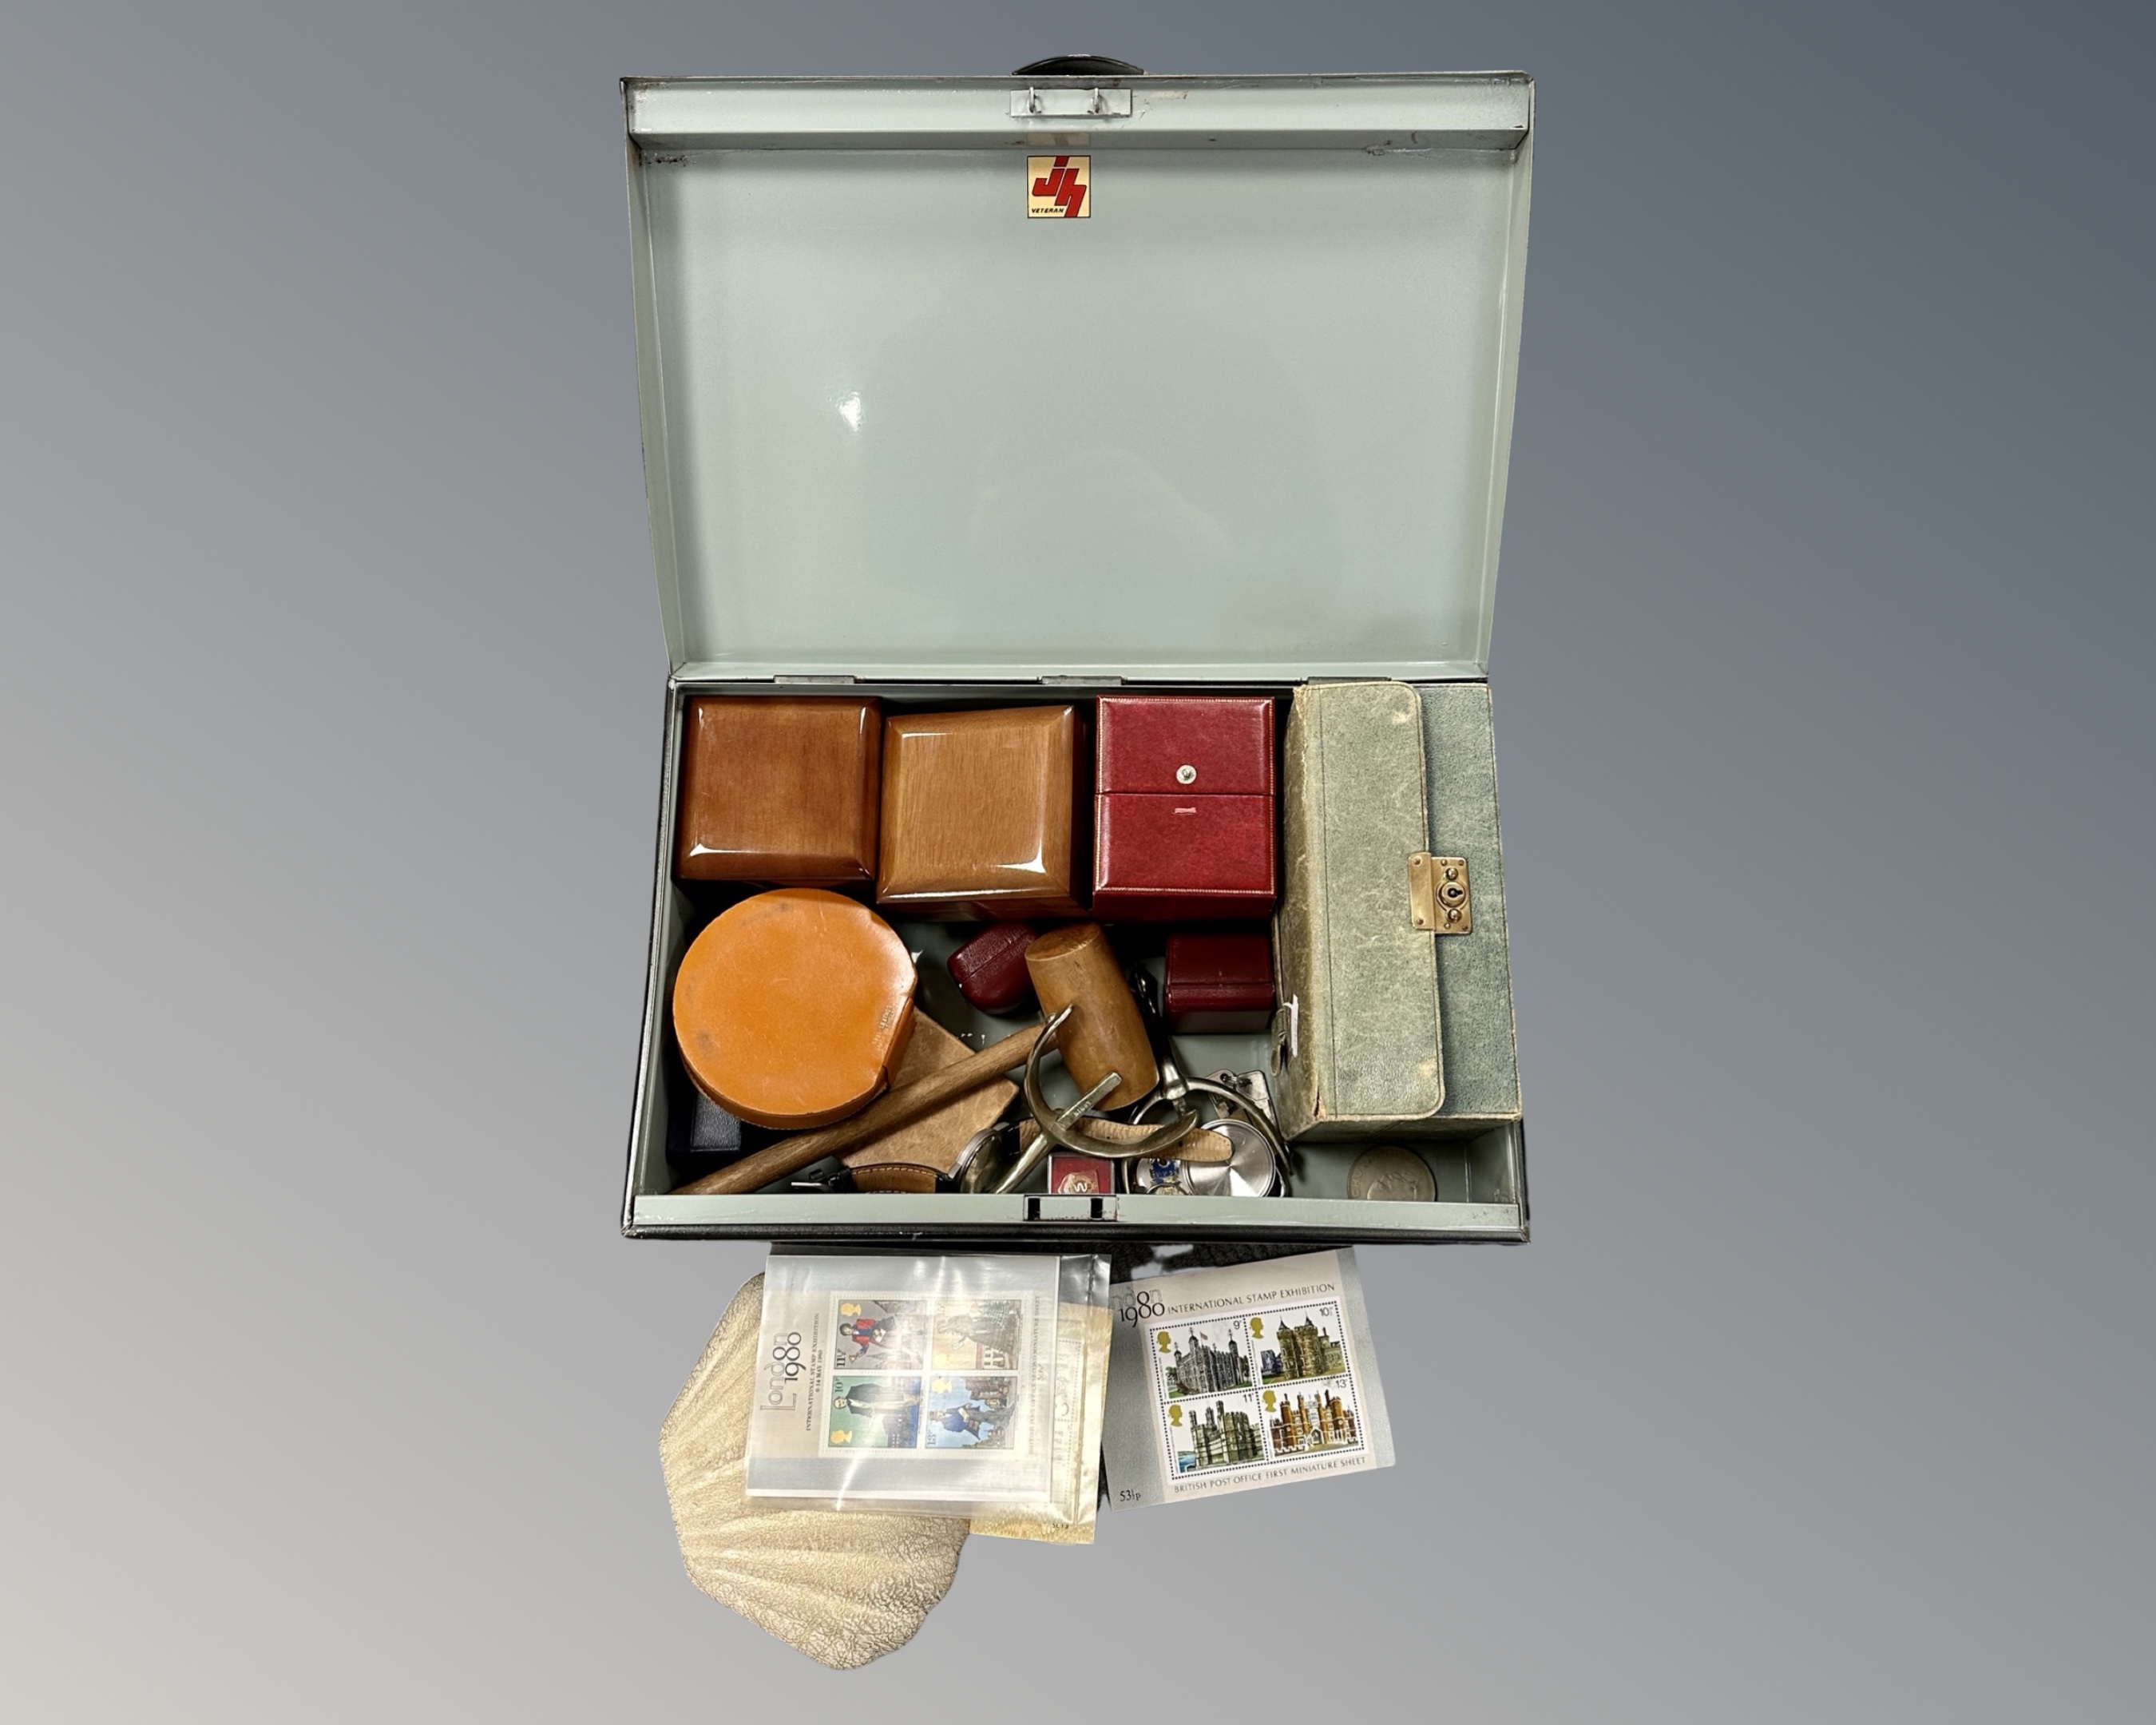 A metal deed box containing a gavel, a pair of spurs, a watch, a lapel badge, a padlock & keys,